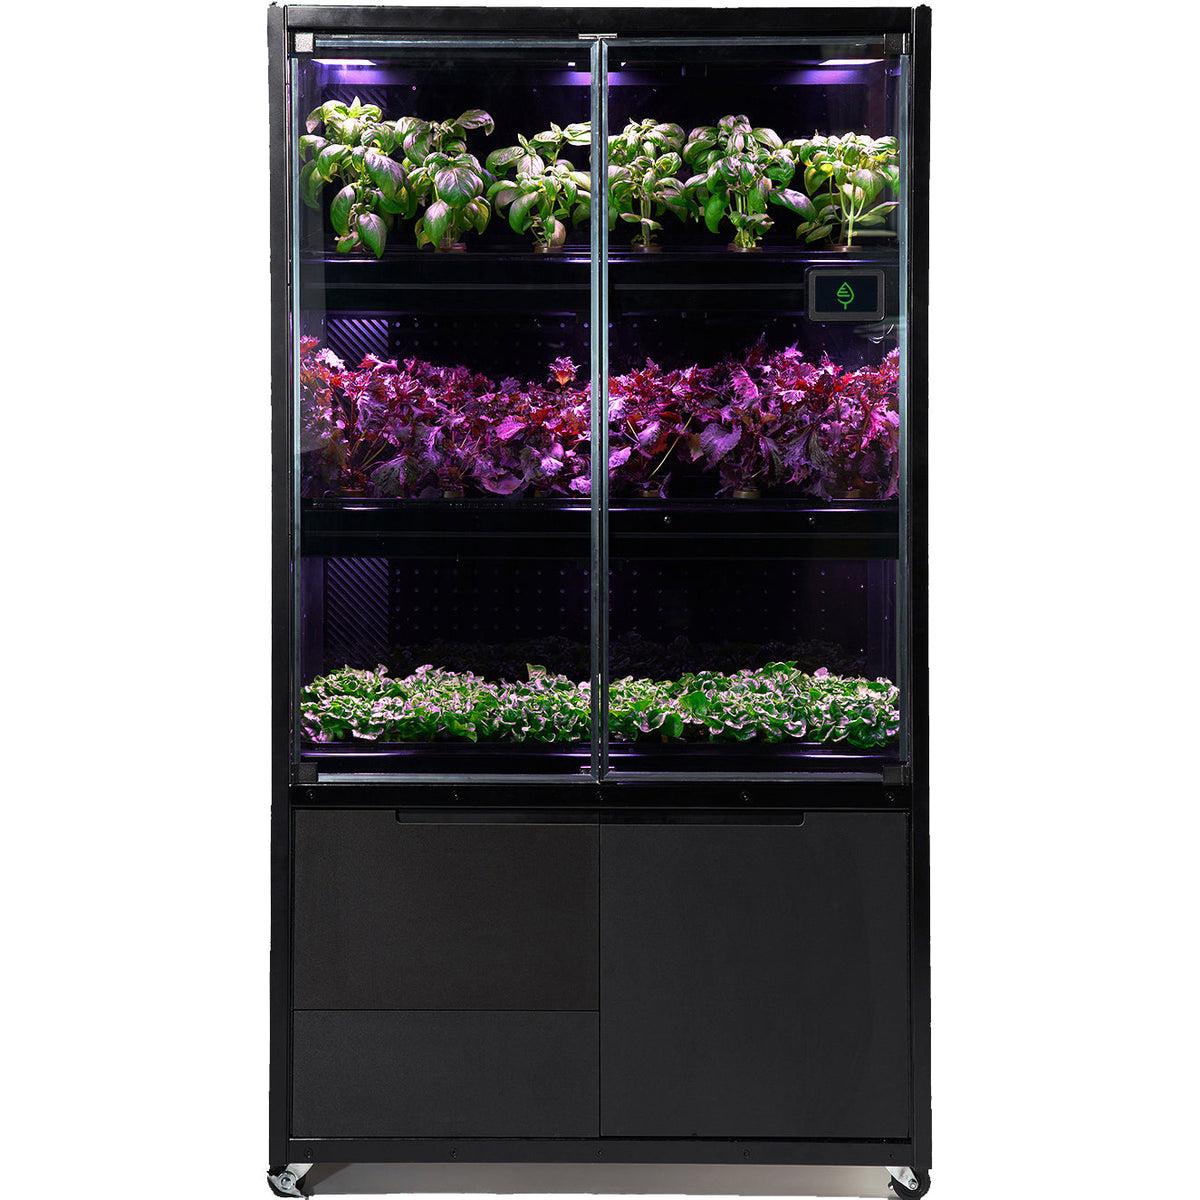 Image for Farmshelf Coming Soon! | Indoor/Vertical Smart Garden | Home Hydroponic Herb Gardening | Indoor Farming and Growing System | Plant Grow Shelf | Best LED Grow Light | Farmshelf